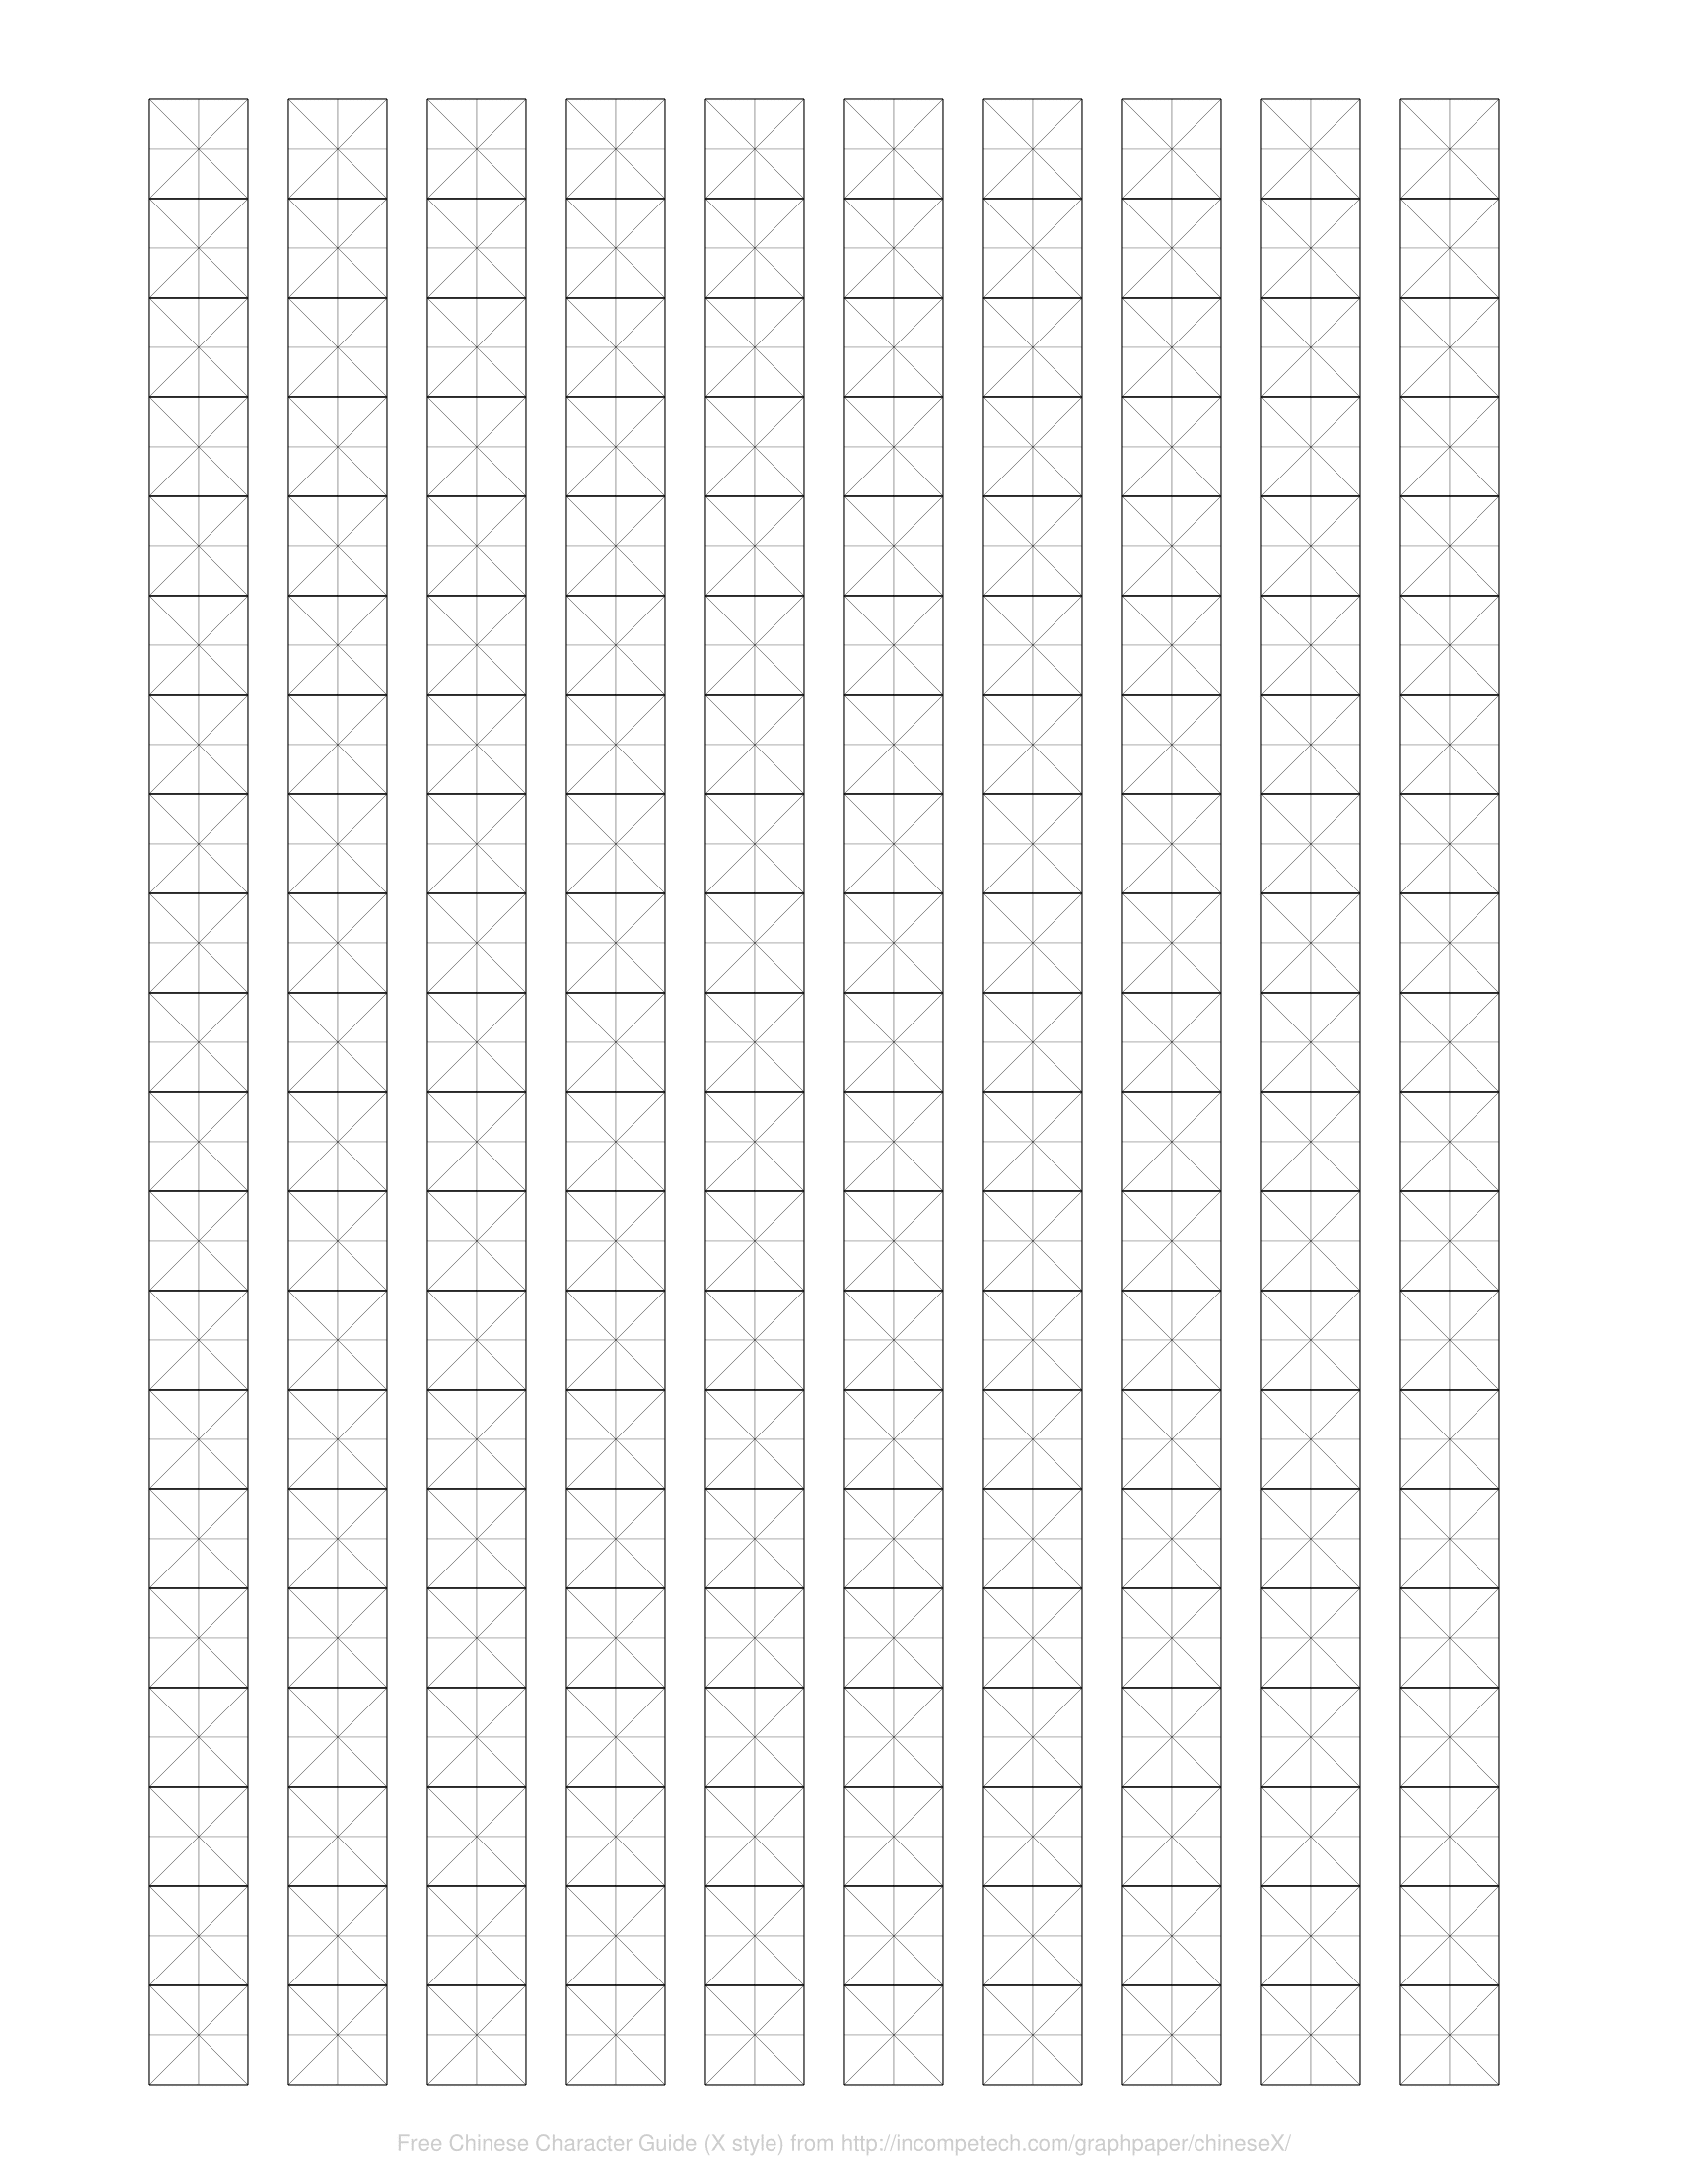 Free Online Graph Paper / Chinese Character Guide (X style)